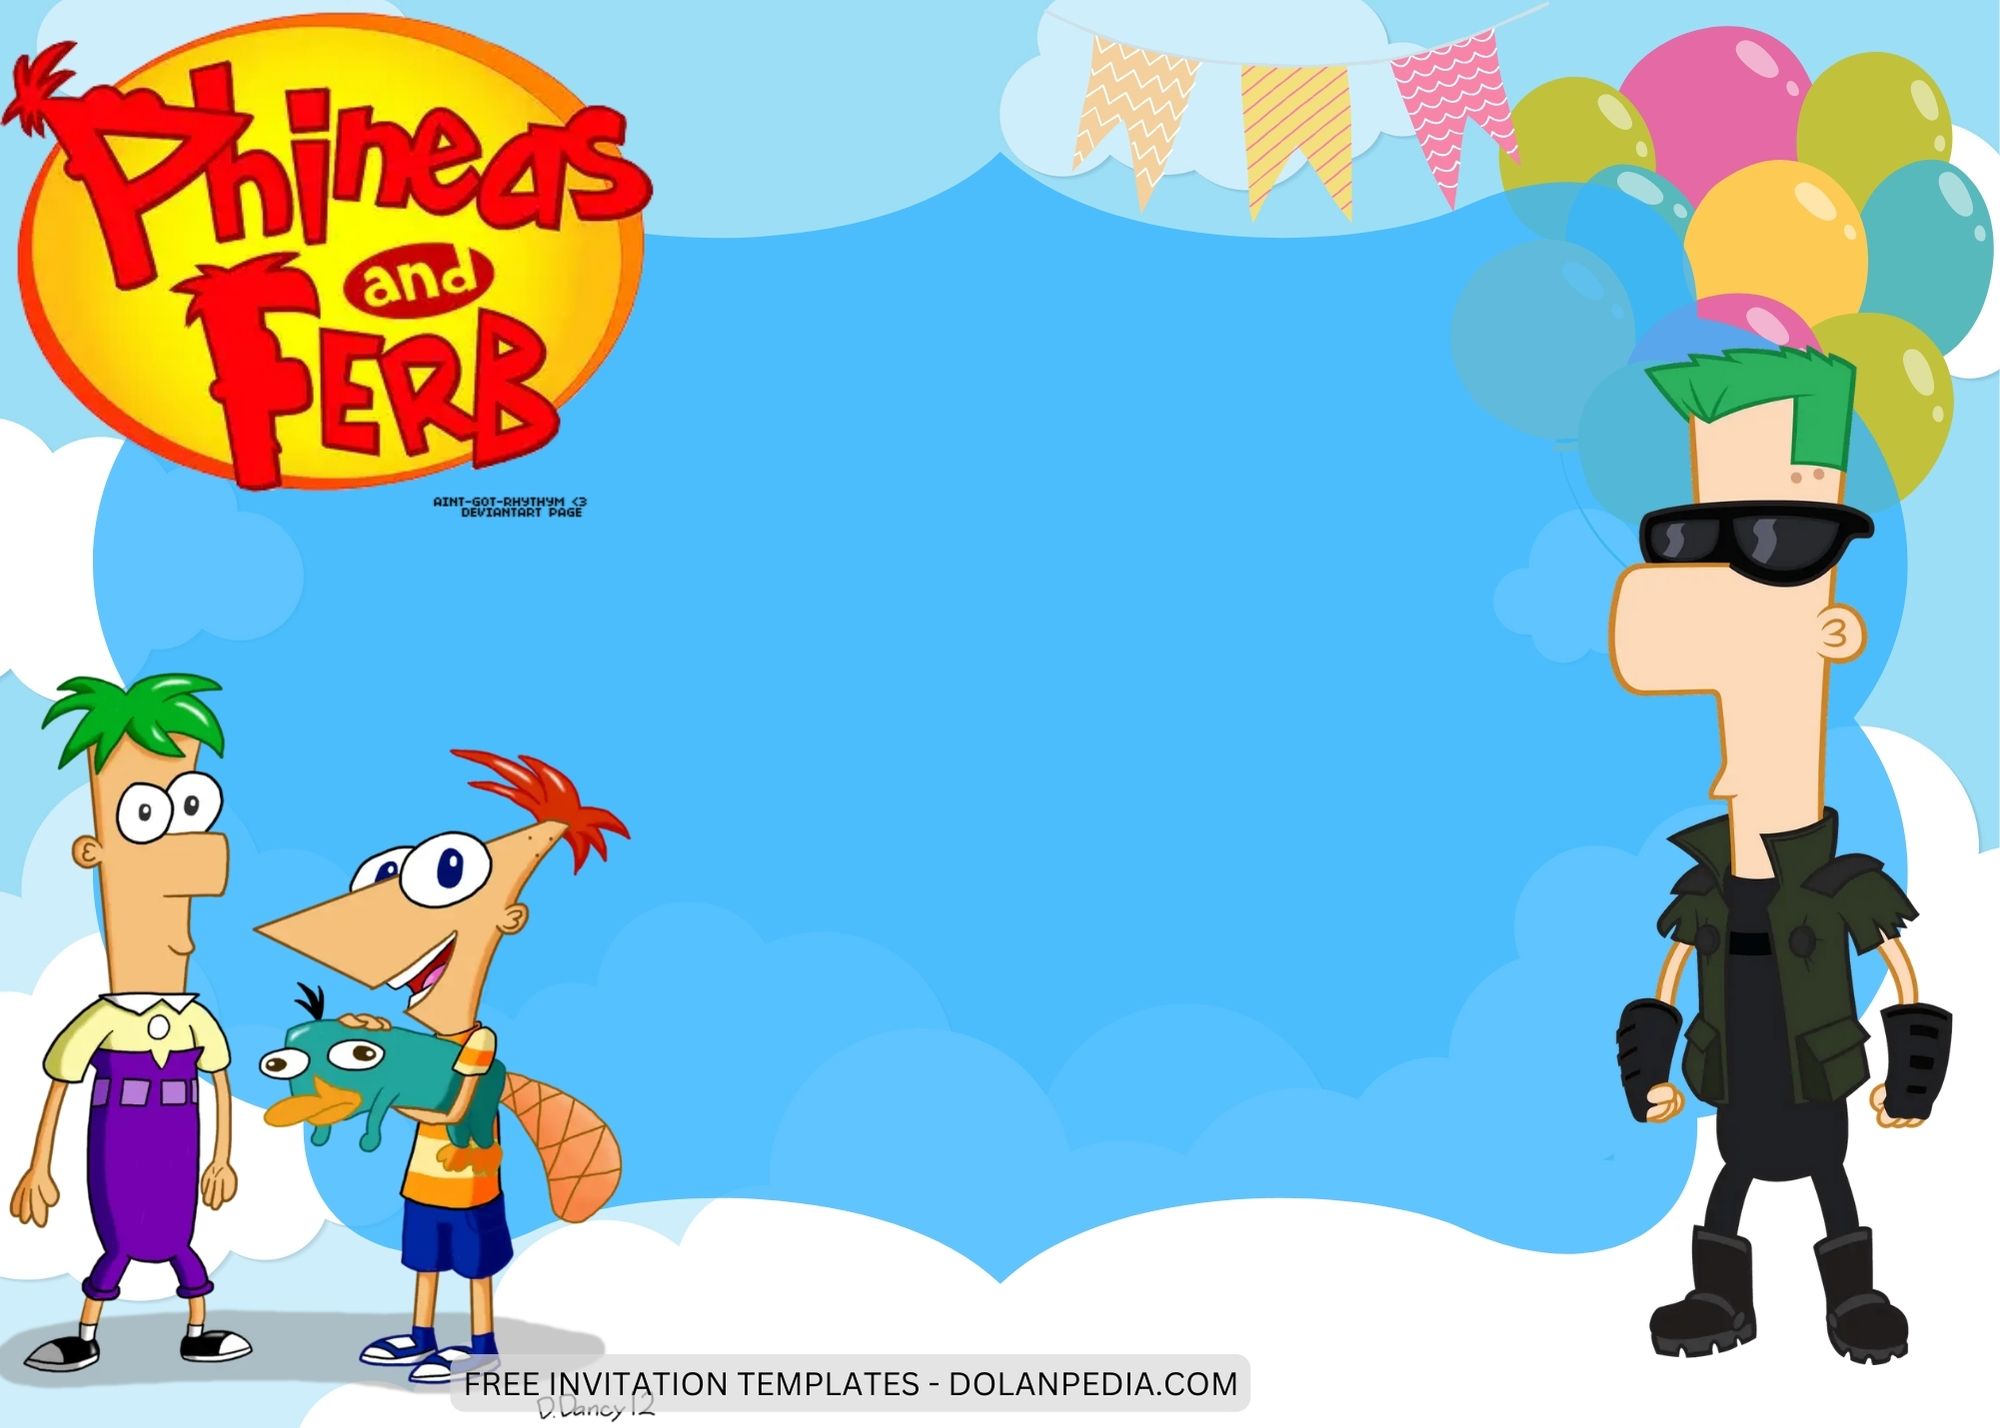 Blank Phineas and Ferb Birthday Invitation Templates Six